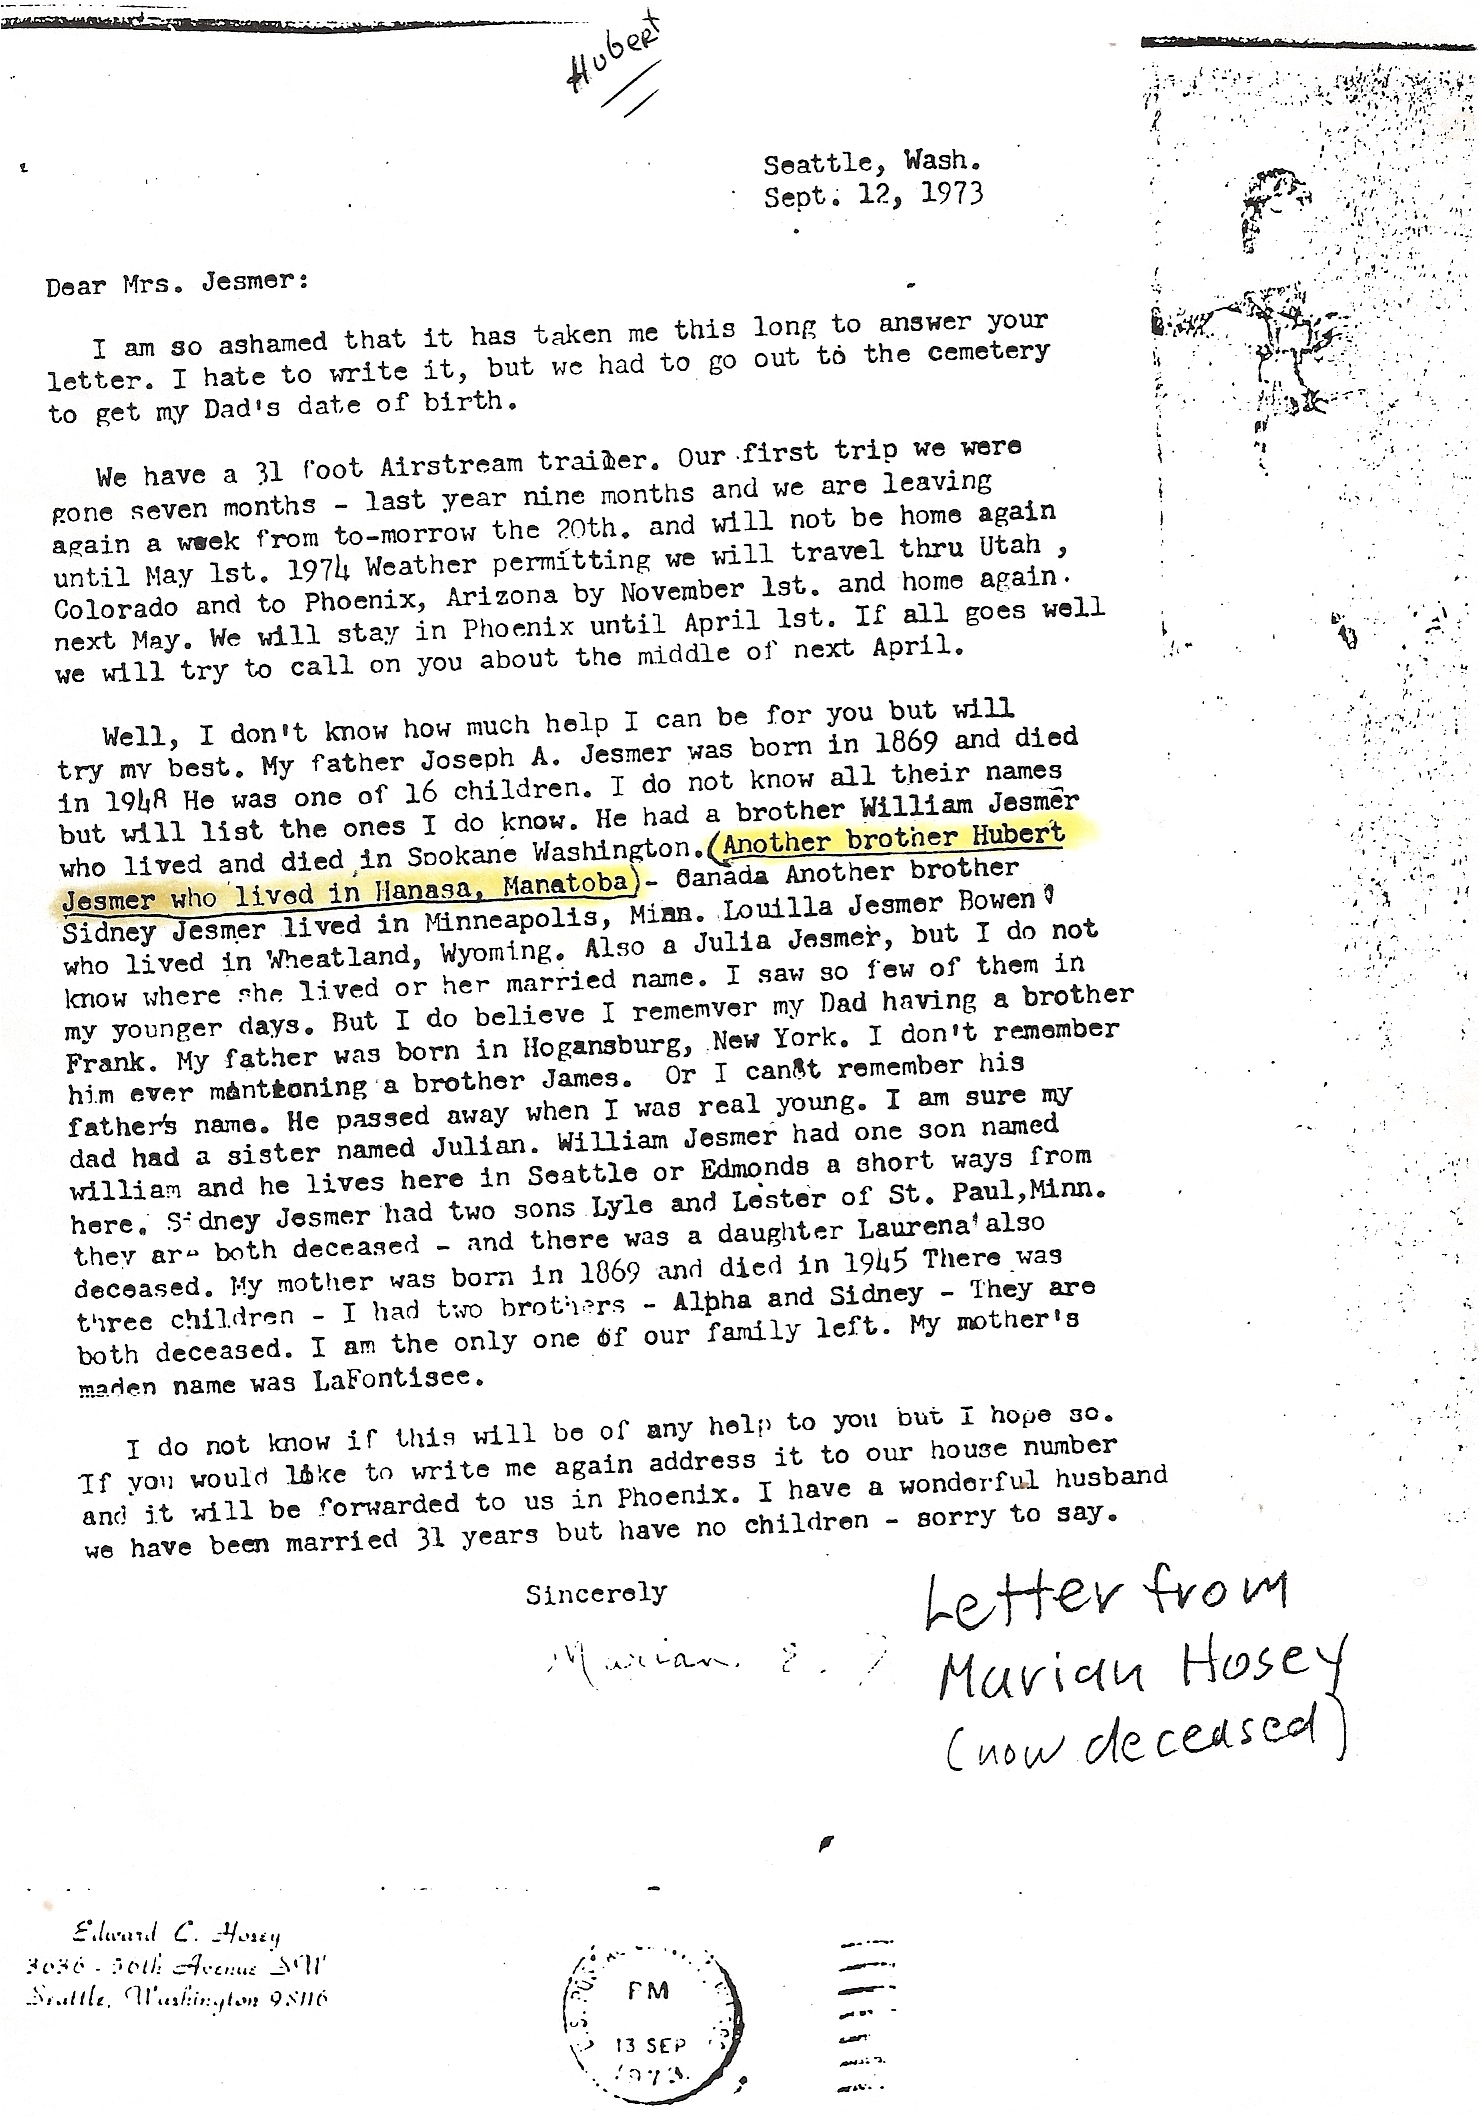 marian hosey letter